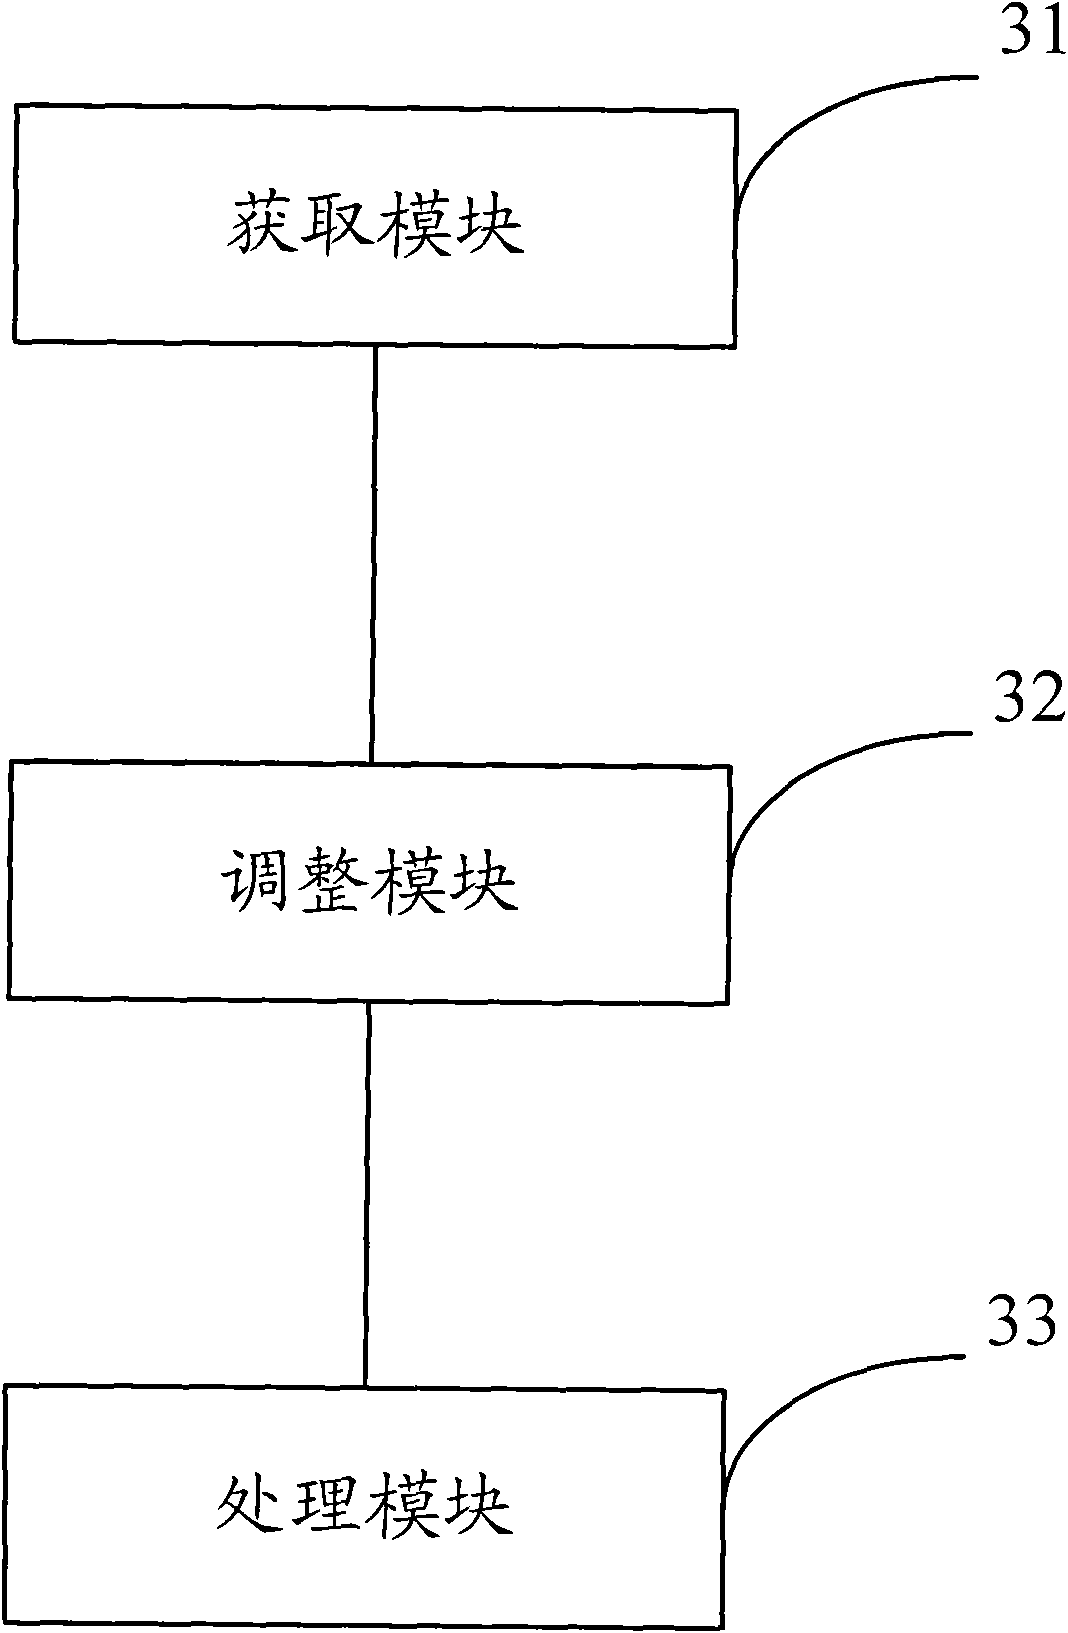 Method and equipment for adjusting flow speed in wireless local area network